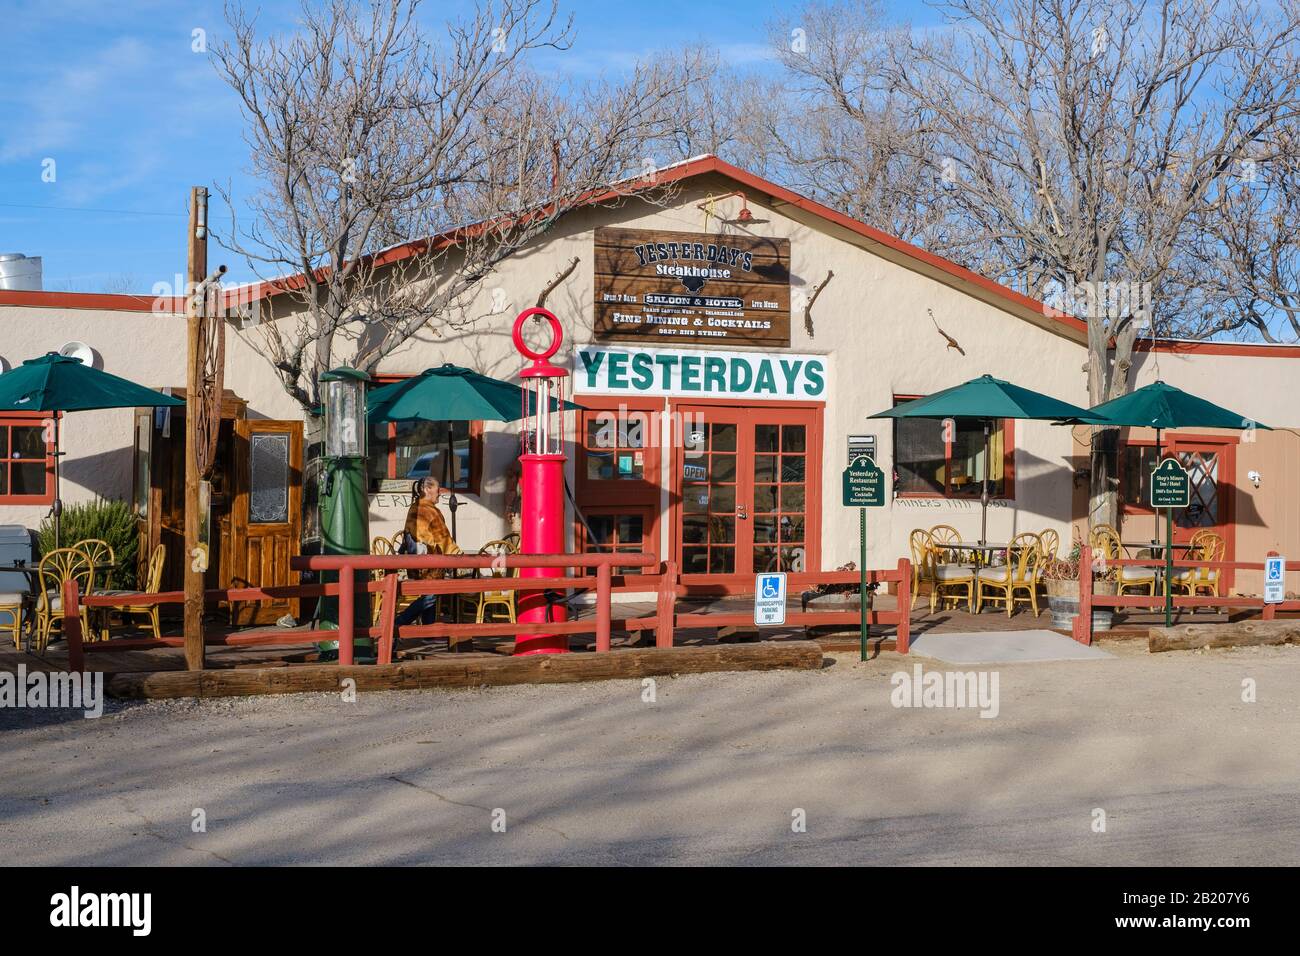 Shep's Miners Inn & Yesterdays Restaurant, Chloride, Arizona, 86431, USA. The oldest continuously inhabited mining town in United States, Stock Photo